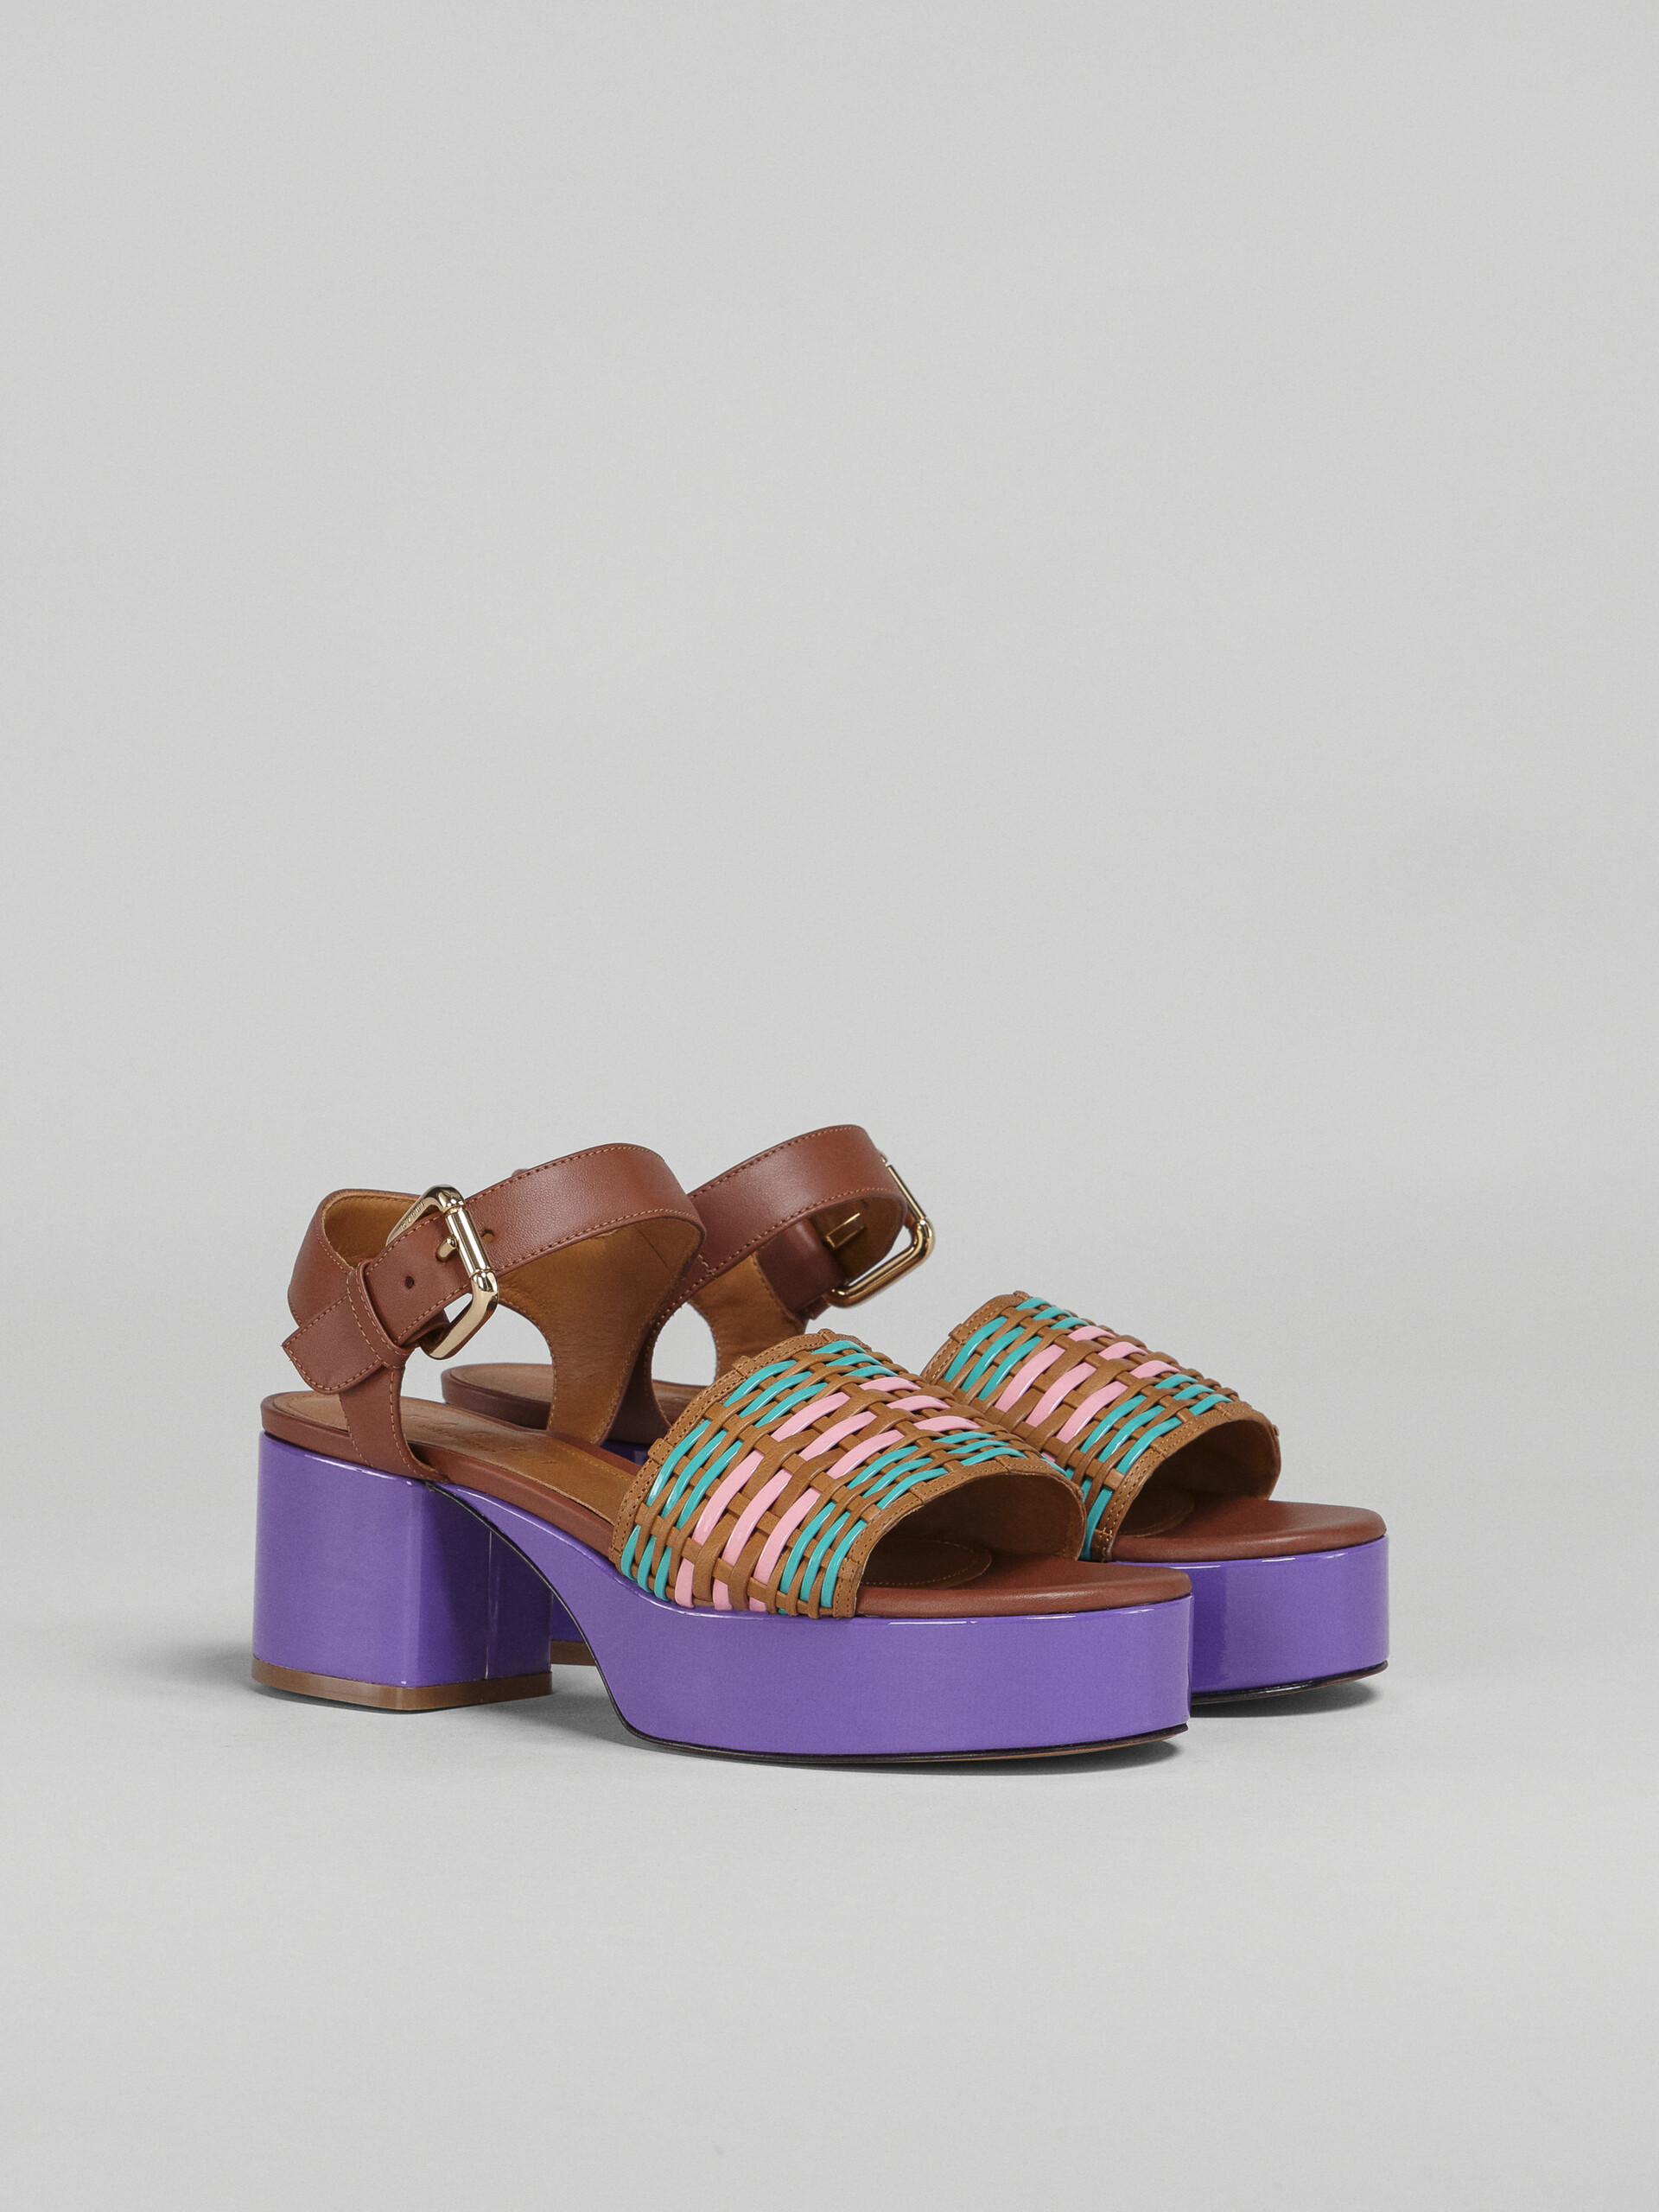 Hand woven vegetable-tanned leather sandal - Sandals - Image 2